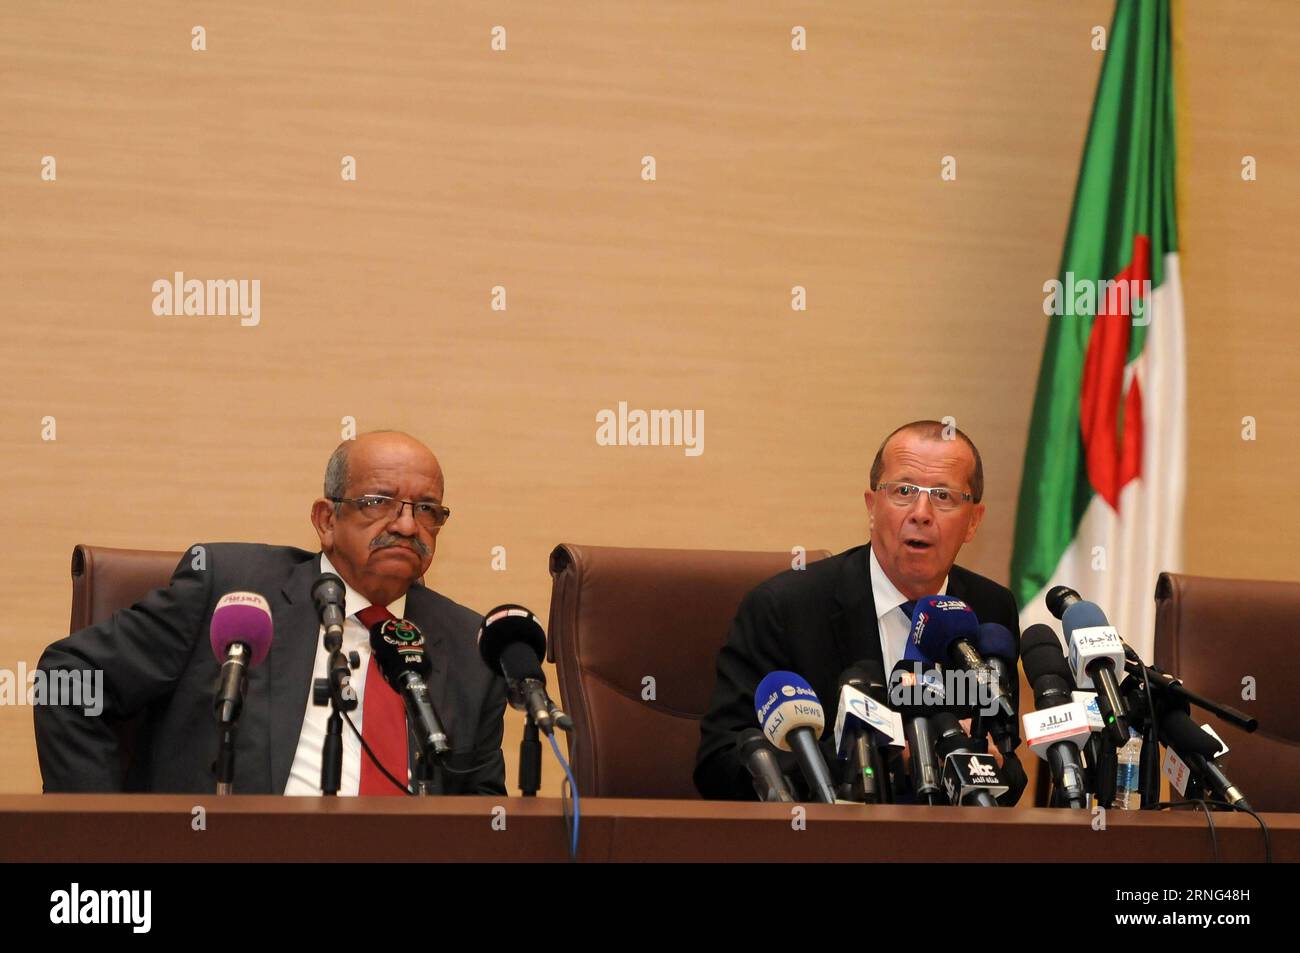 (160904) -- ALGIERS, Sept. 4, 2016 () -- UN Special Envoy for Libya Martin Kobler (R) and Algerian Minister for Maghreb Affairs, the African Union and the Arab League Abdelkader Messahel hold a press conference in Algiers, capital of Algeria, on Sept. 4, 2016. () (syq) ALGERIA-ALGIERS-UN-KOBLER-VISIT Xinhua PUBLICATIONxNOTxINxCHN   160904 Algiers Sept 4 2016 UN Special Envoy for Libya Martin Kobler r and Algerian Ministers for Maghreb Affairs The African Union and The Arab League Abdel Kader Messahel Hold a Press Conference in Algiers Capital of Algeria ON Sept 4 2016 syq Algeria Algiers UN Ko Stock Photo